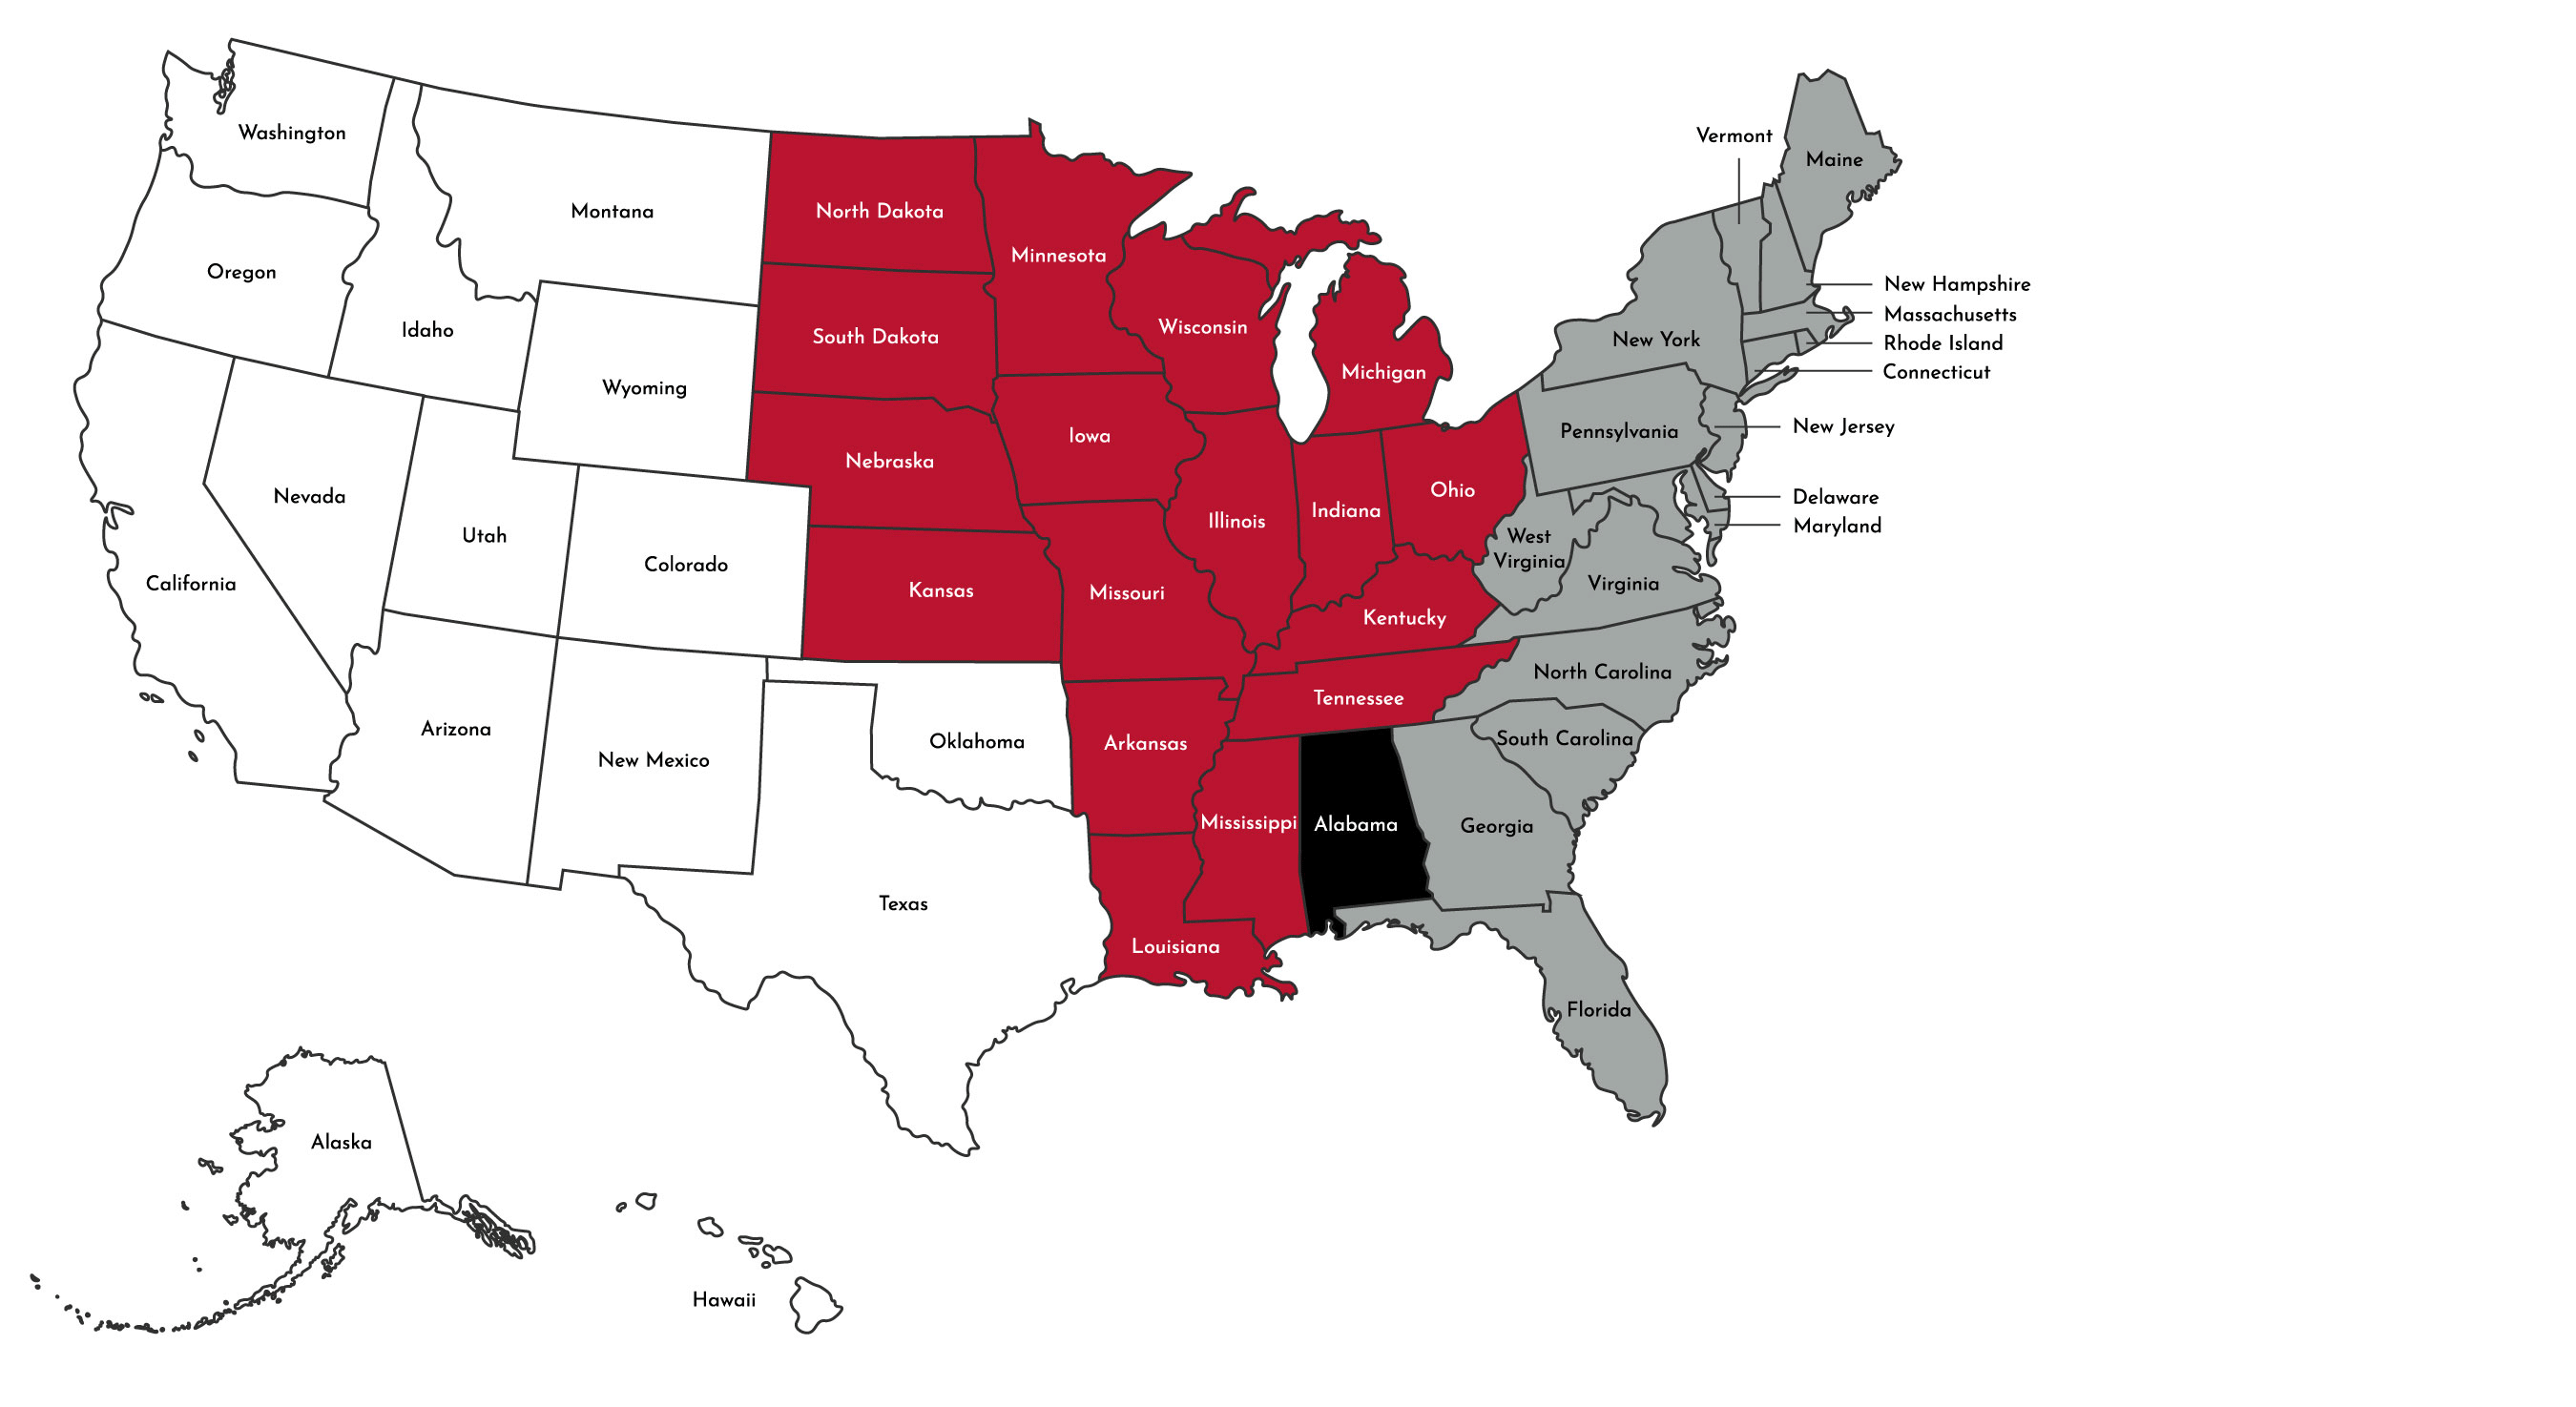 Map of the United States divided into three recruiting territories, West Central and East, with Alabama being shared by all three recruiters